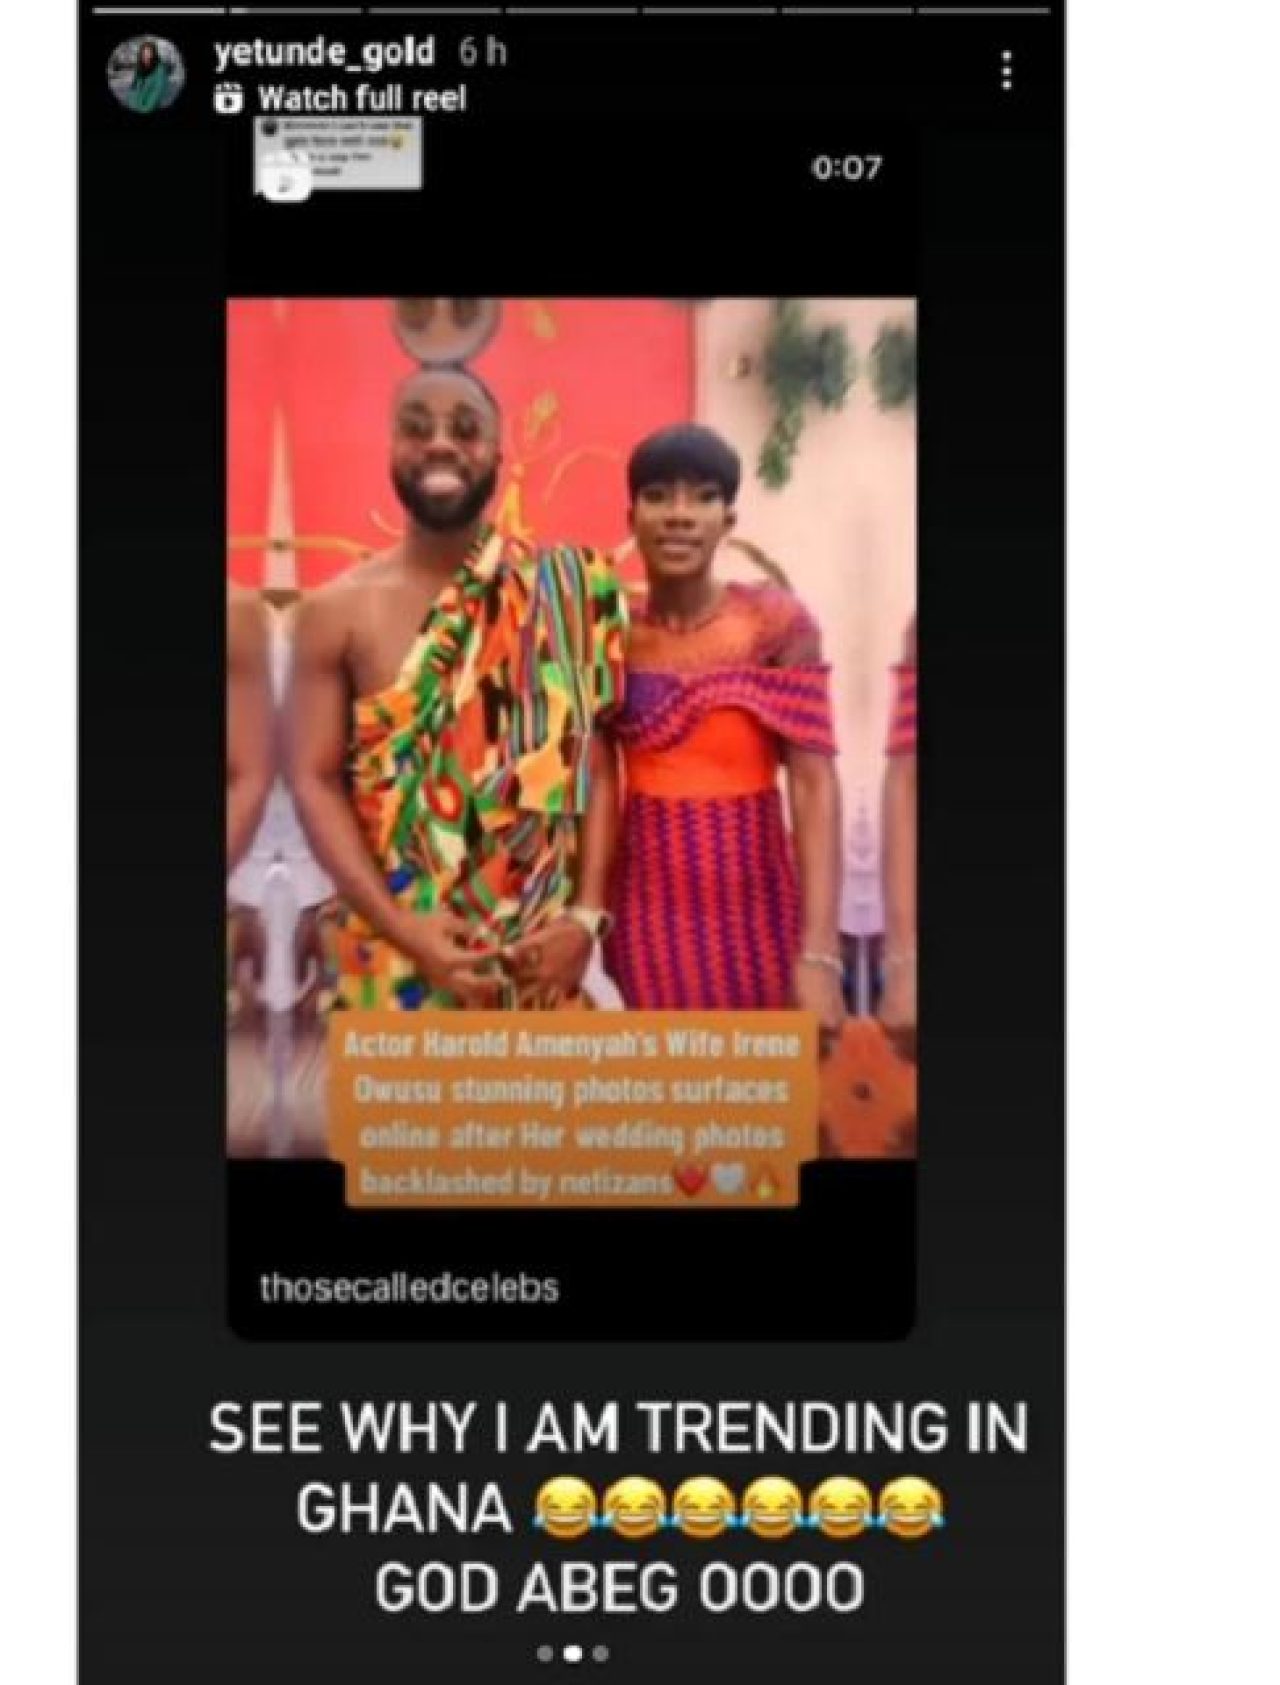 "That is not me in Jesus name" - Nigerian Actress Reacts To Being Mistaken For Harold Amenyah’s Wife Afro News Wire